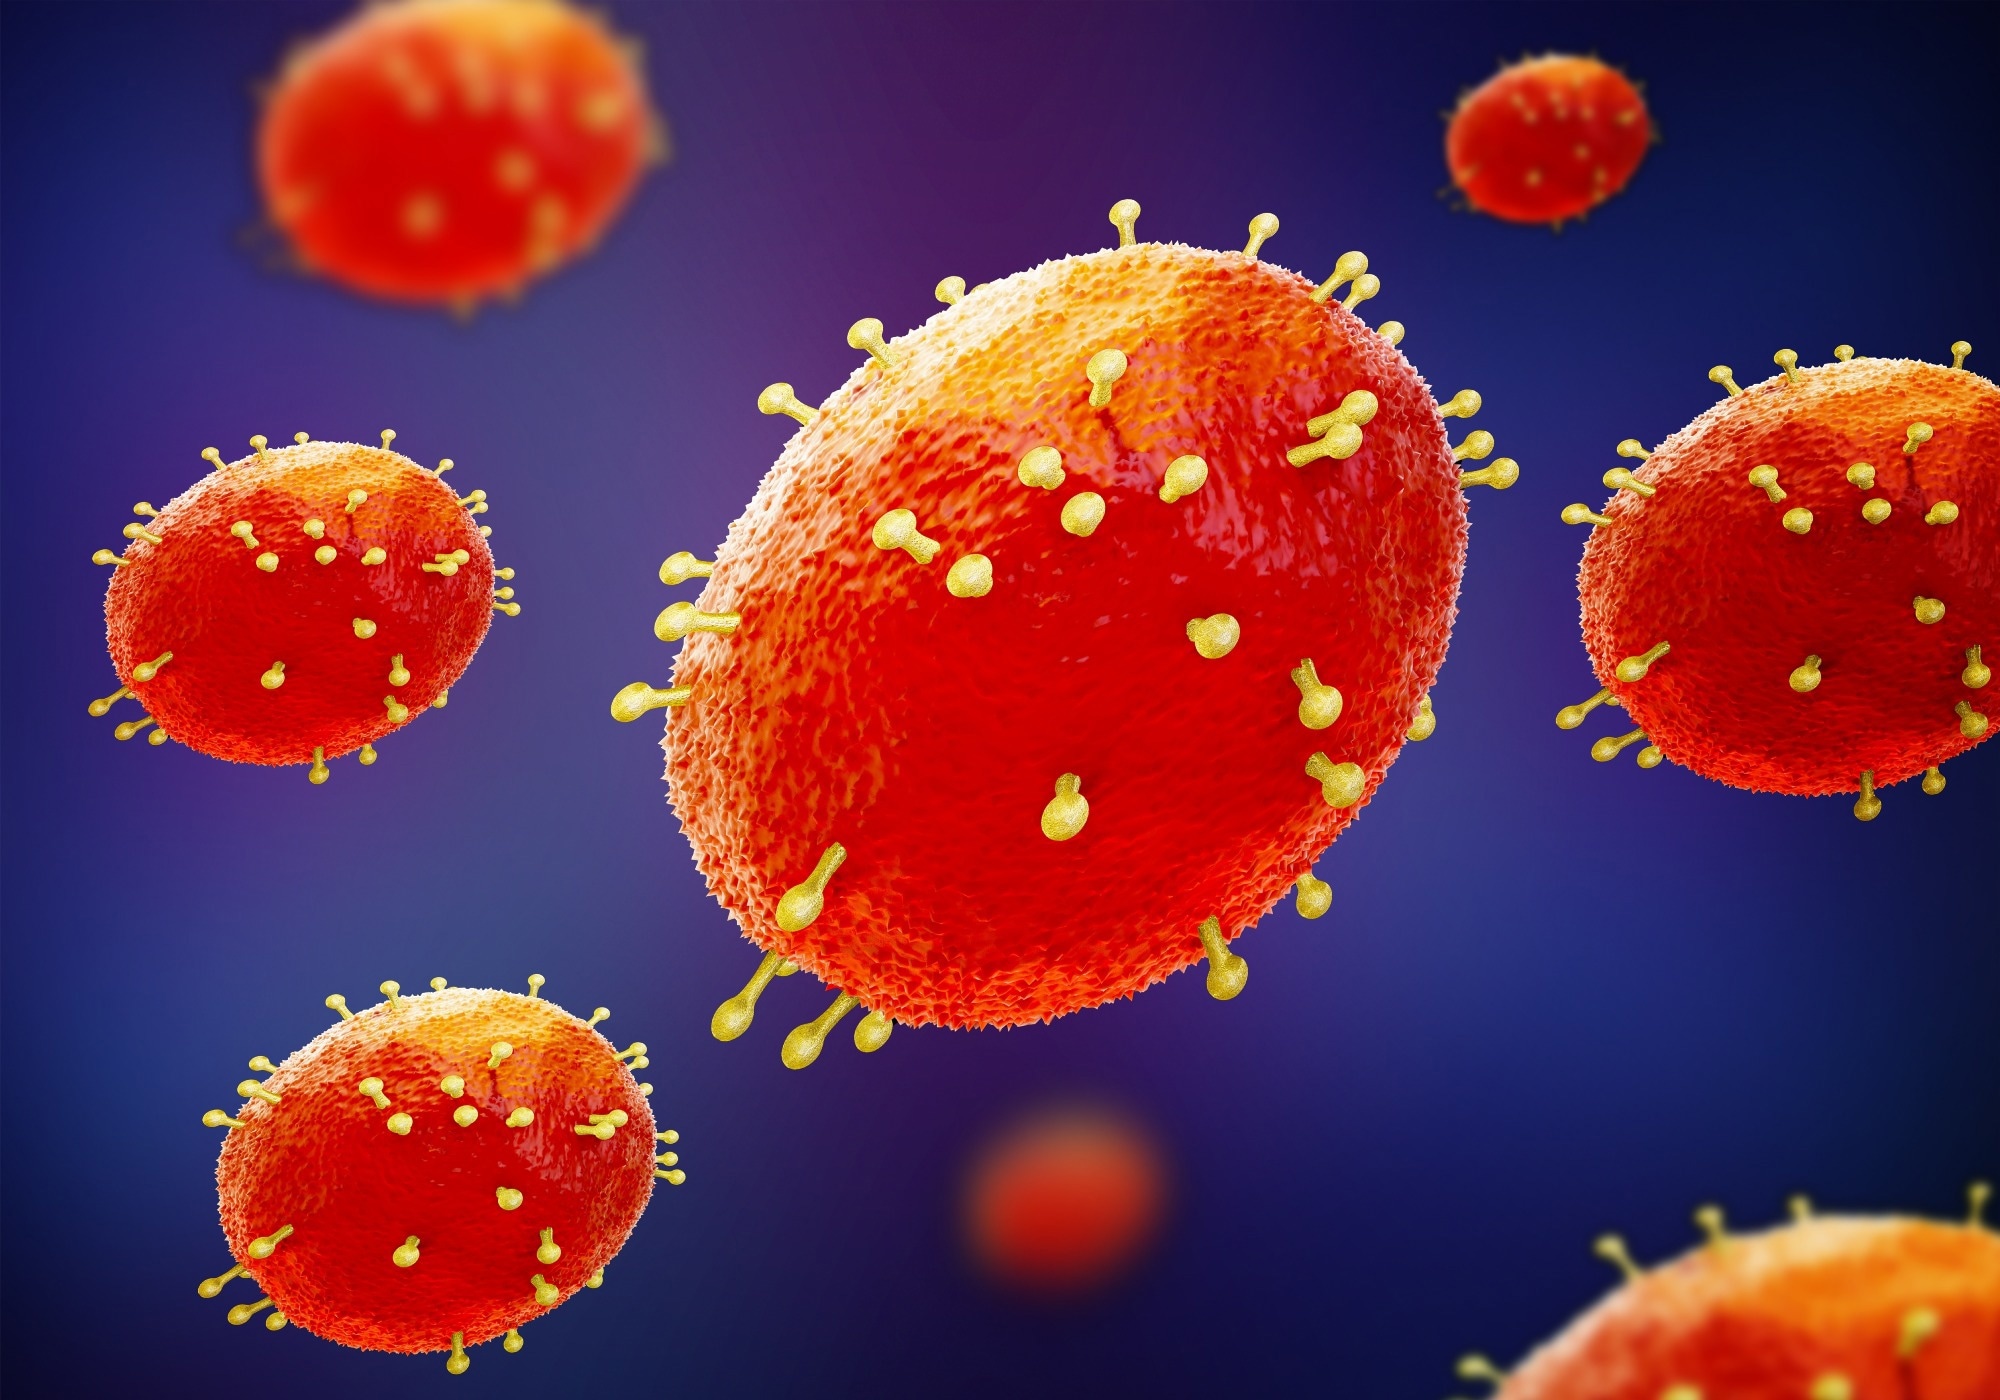 Study: Epidemiology of Early Monkeypox Virus Transmission in Sexual Networks of Gay and Bisexual Men, England, 2022. Image Credit: MIA Studio/Shutterstock